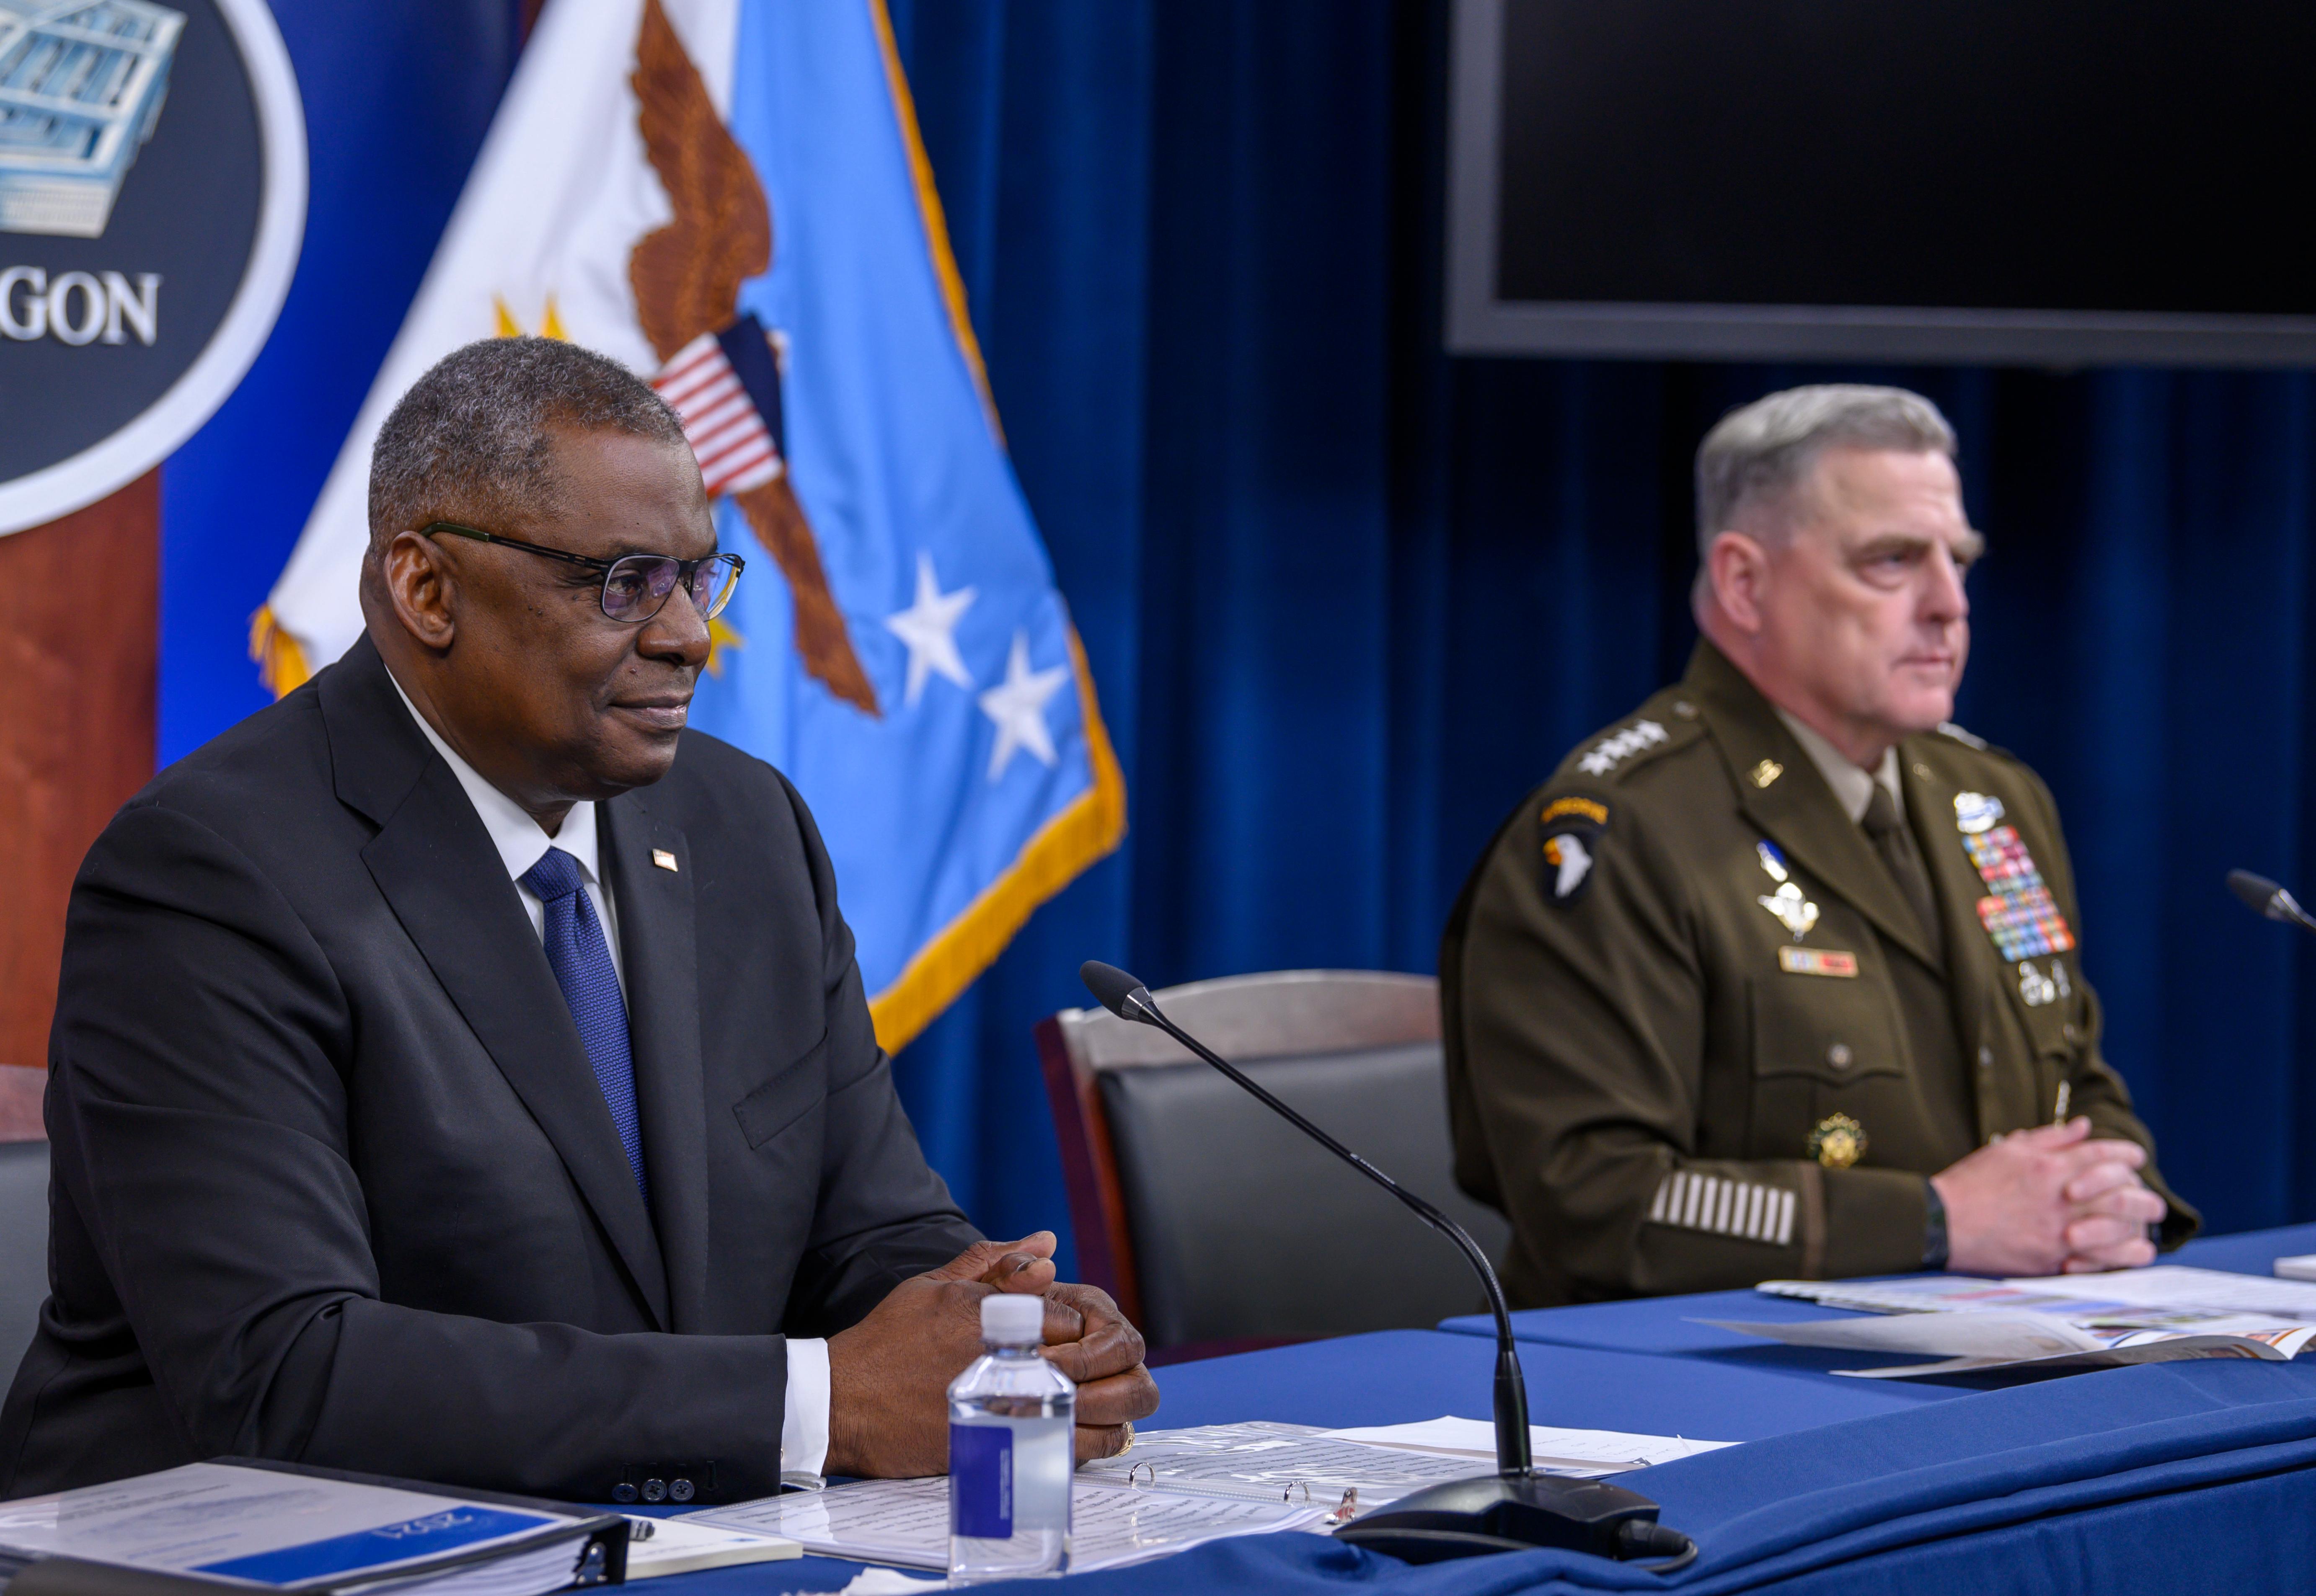 Secretary of Defense Lloyd J. Austin III and Chairman of the Joint Chiefs of Staff Army Gen. Mark A. Milley testify before the House Appropriations Committee-Defense on the Fiscal 2022 Department of Defense Budget in the Pentagon Press Briefing Room, Washington, D.C., May 27, 2021. (DoD photo by U.S. Air Force Staff Sgt. Brittany A. Chase)